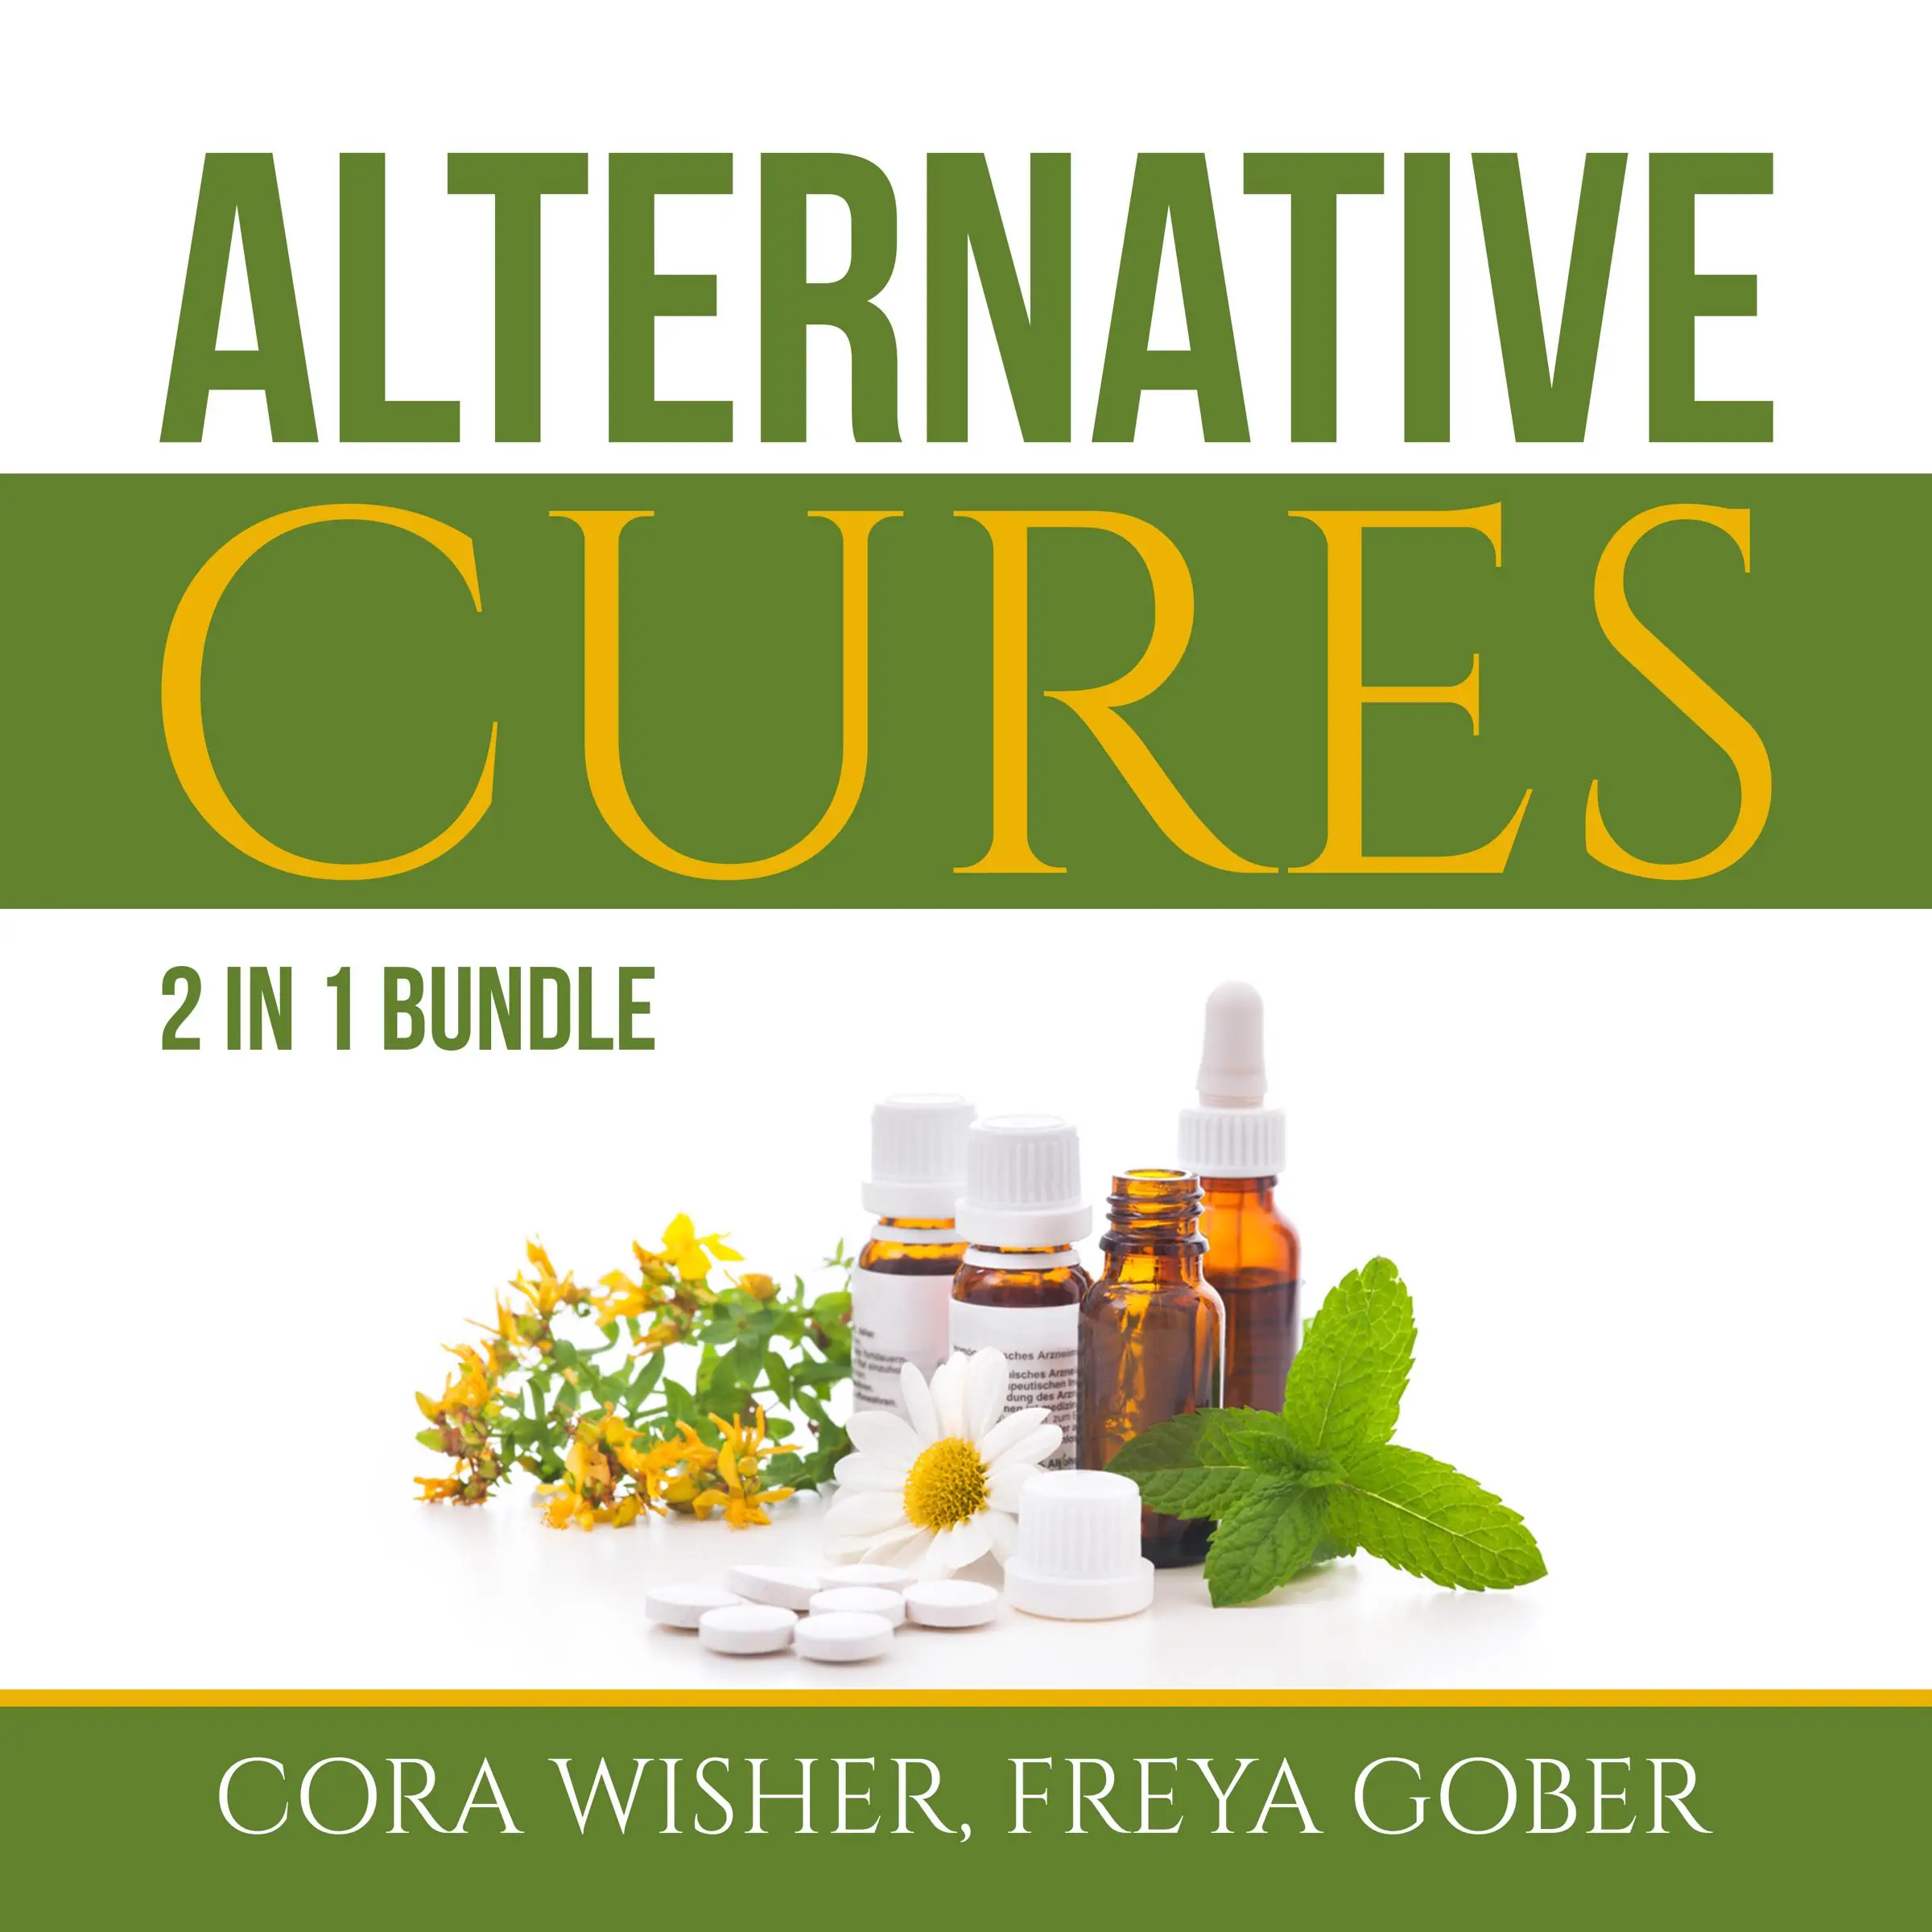 Alternative Cures Bundle: 2 in 1 Bundle, Natural Cures and Alternative Medicine Audiobook by Cora Wisher and Freya Gober